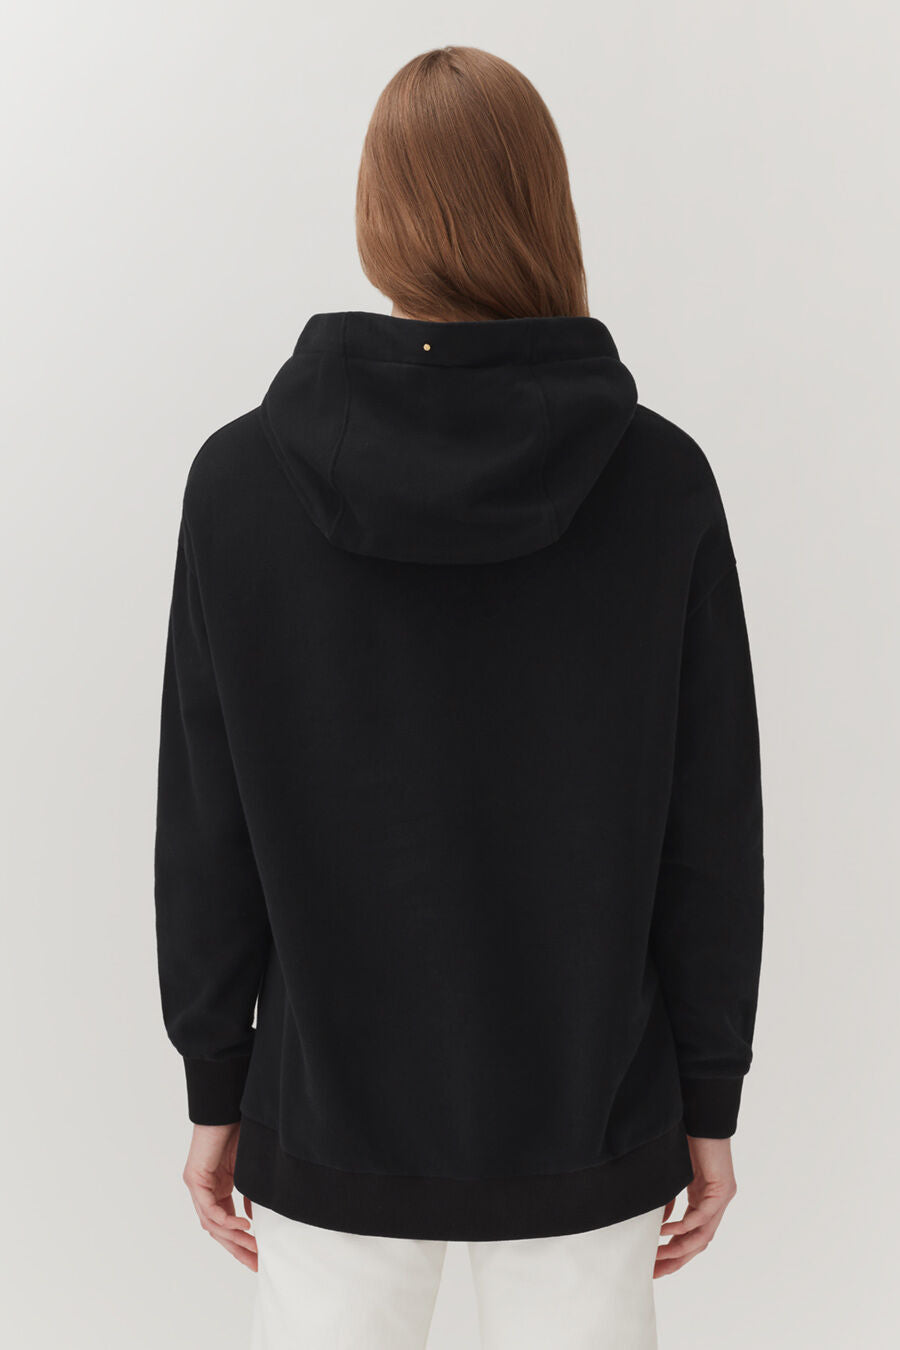 Person wearing a hooded top, seen from the back.